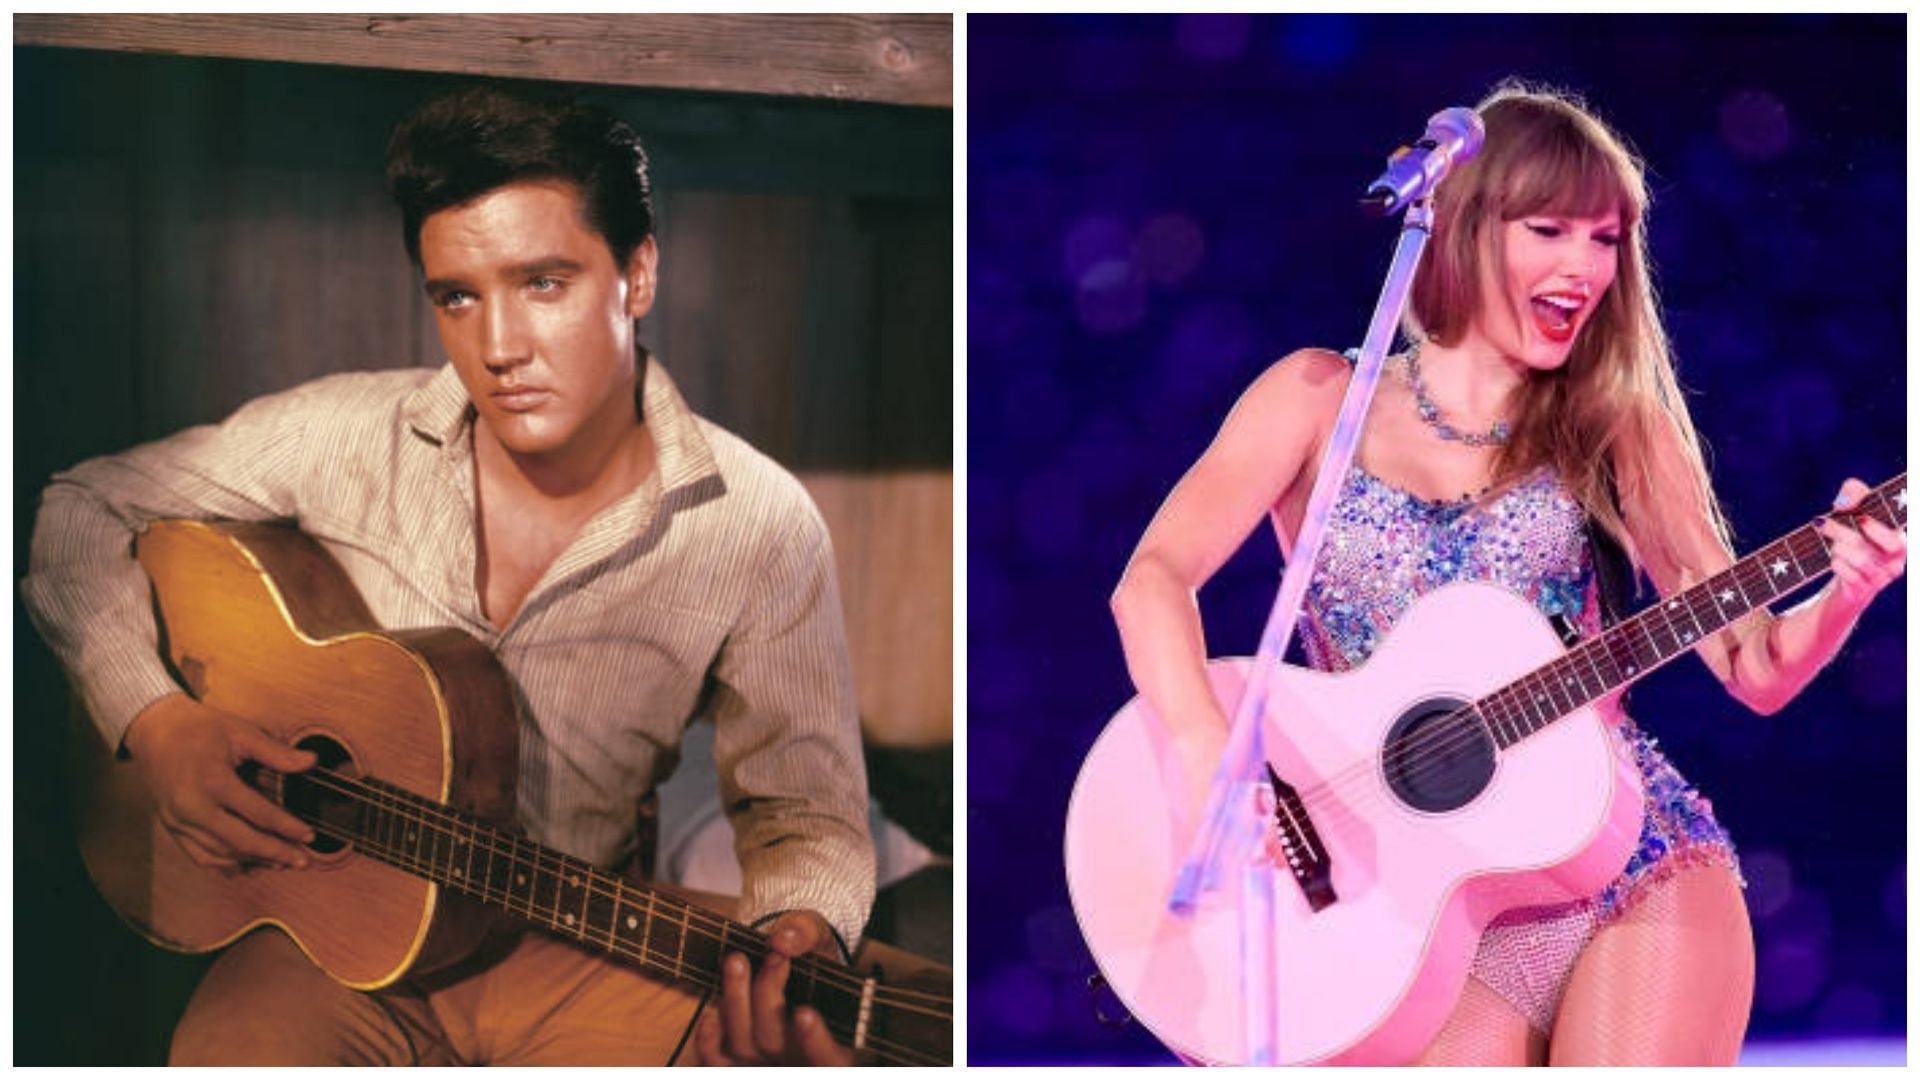 Taylor Swift and Elvis Presley via Getty Images